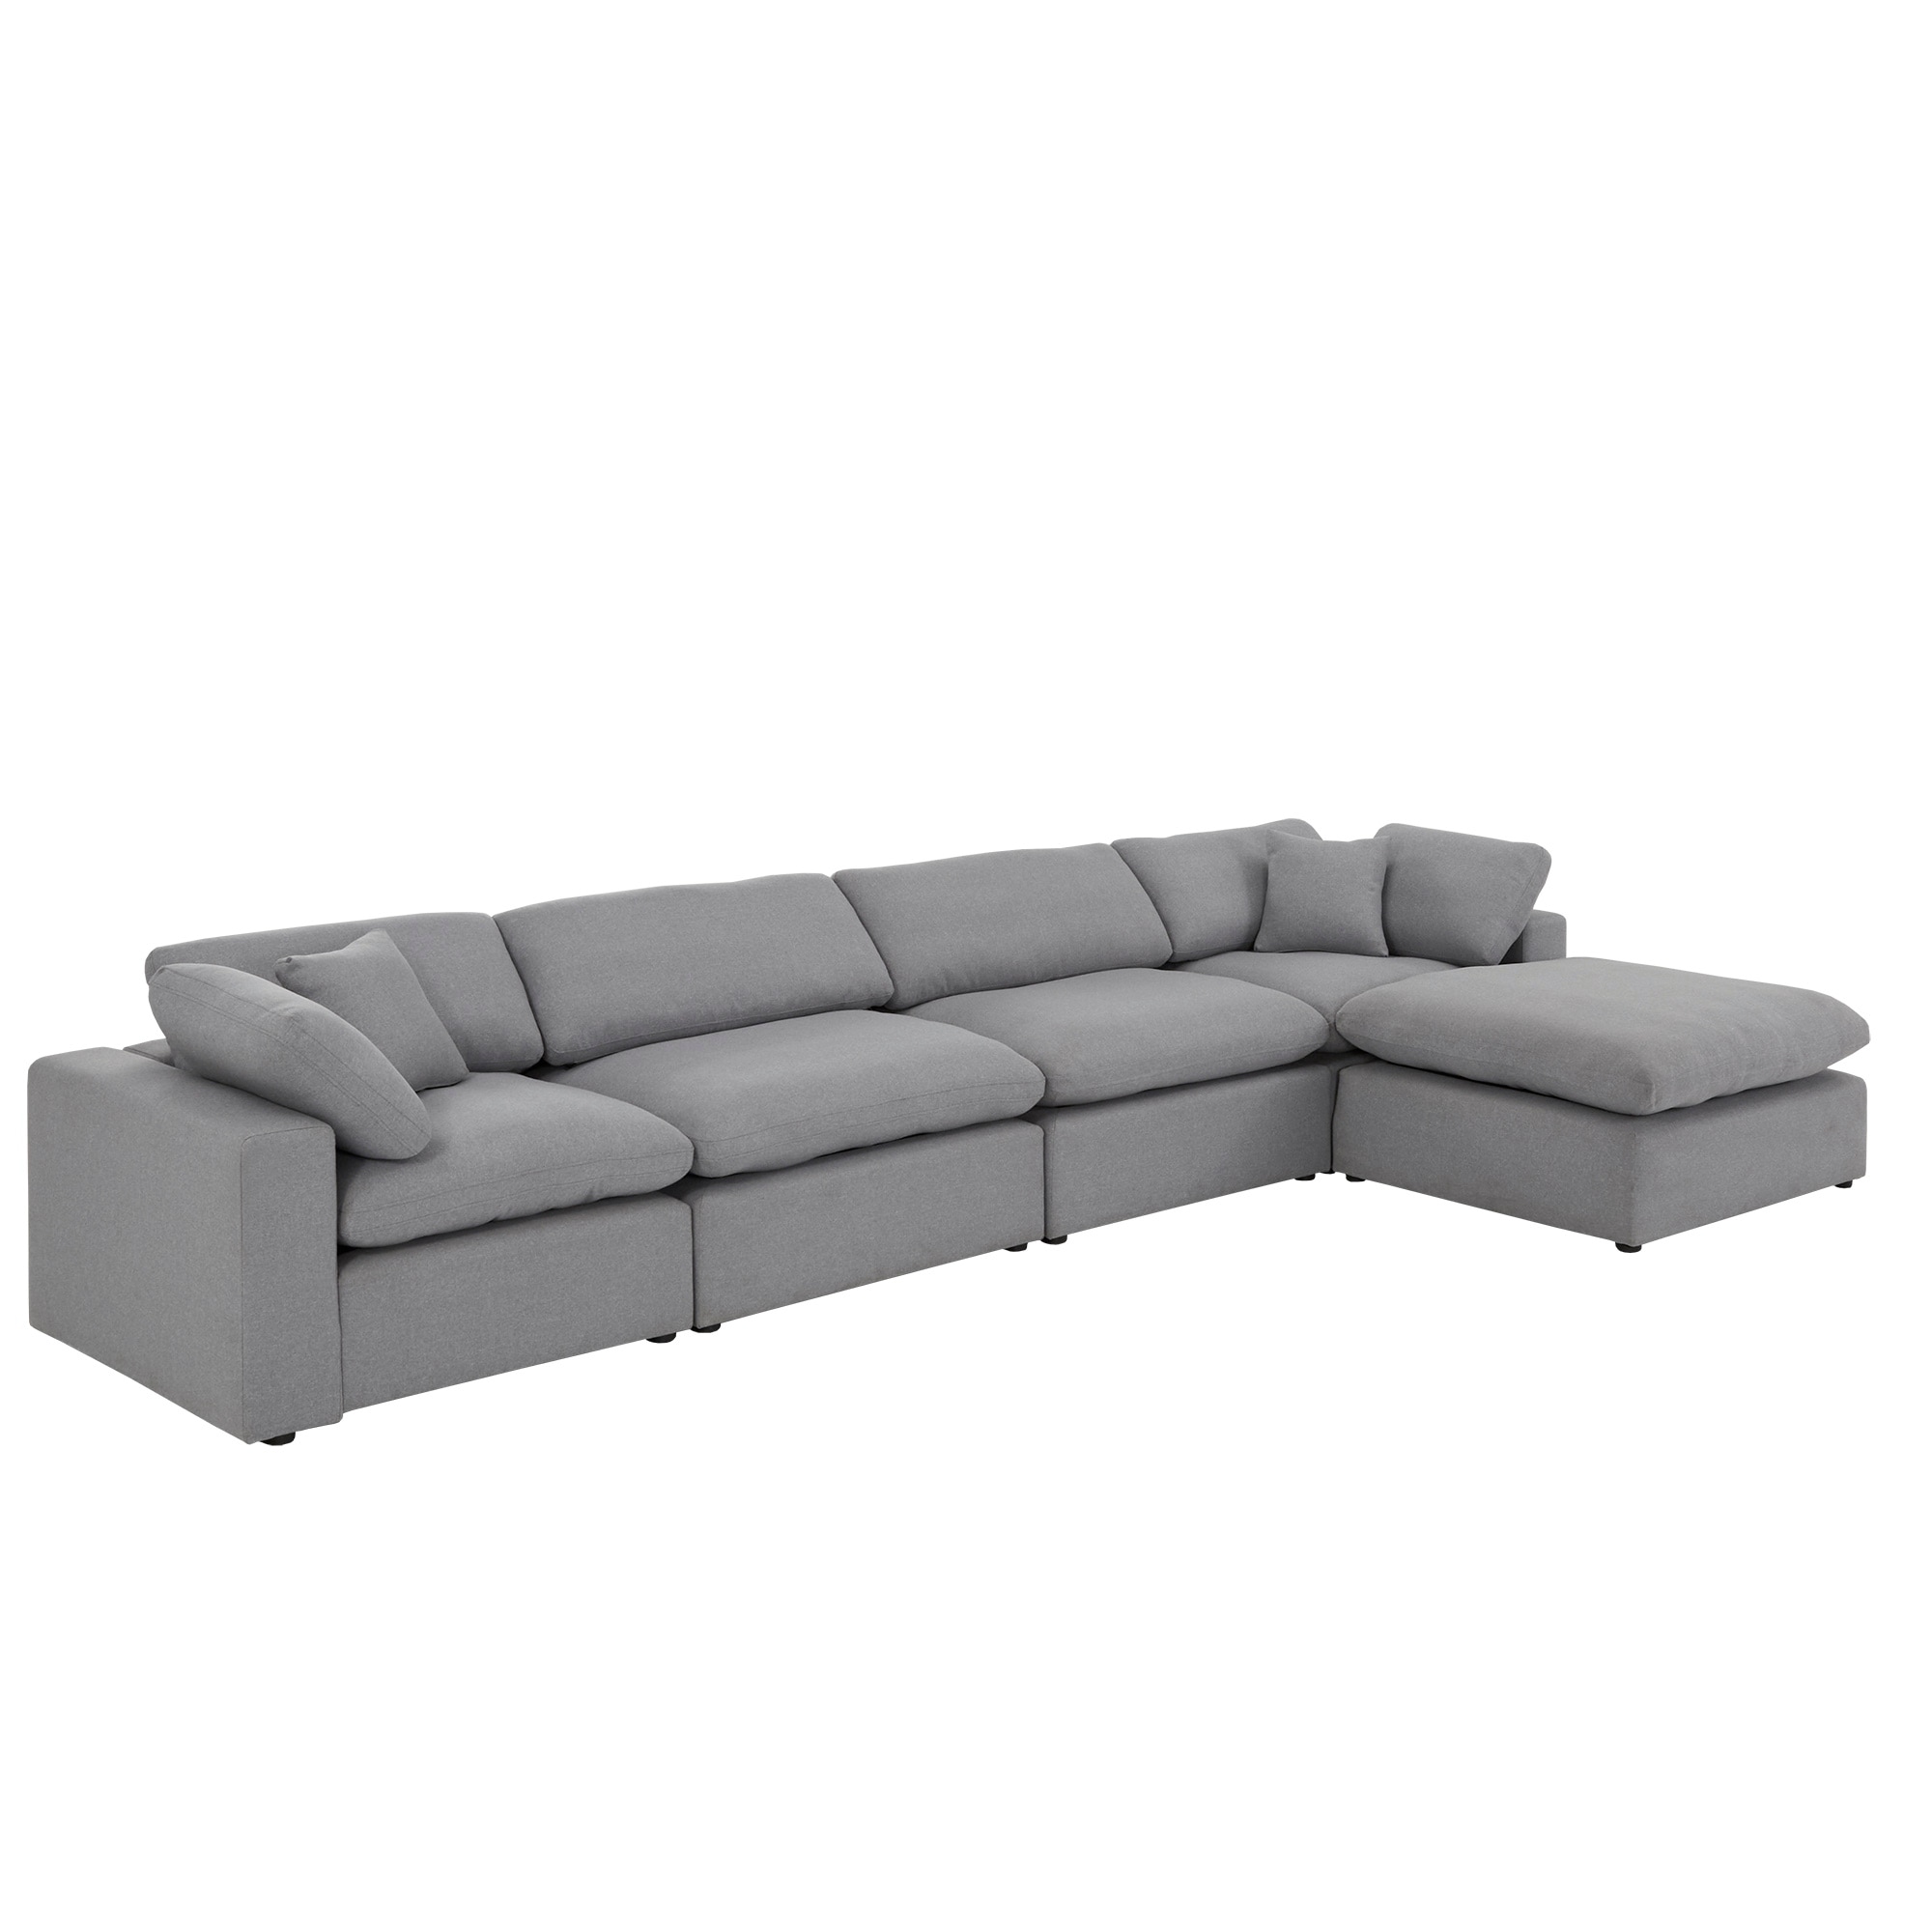 iNSPIRE Q Anka Grey Linen Down Filled Cushioned Chaise Sectional Sofa with Ottoman by  Modern